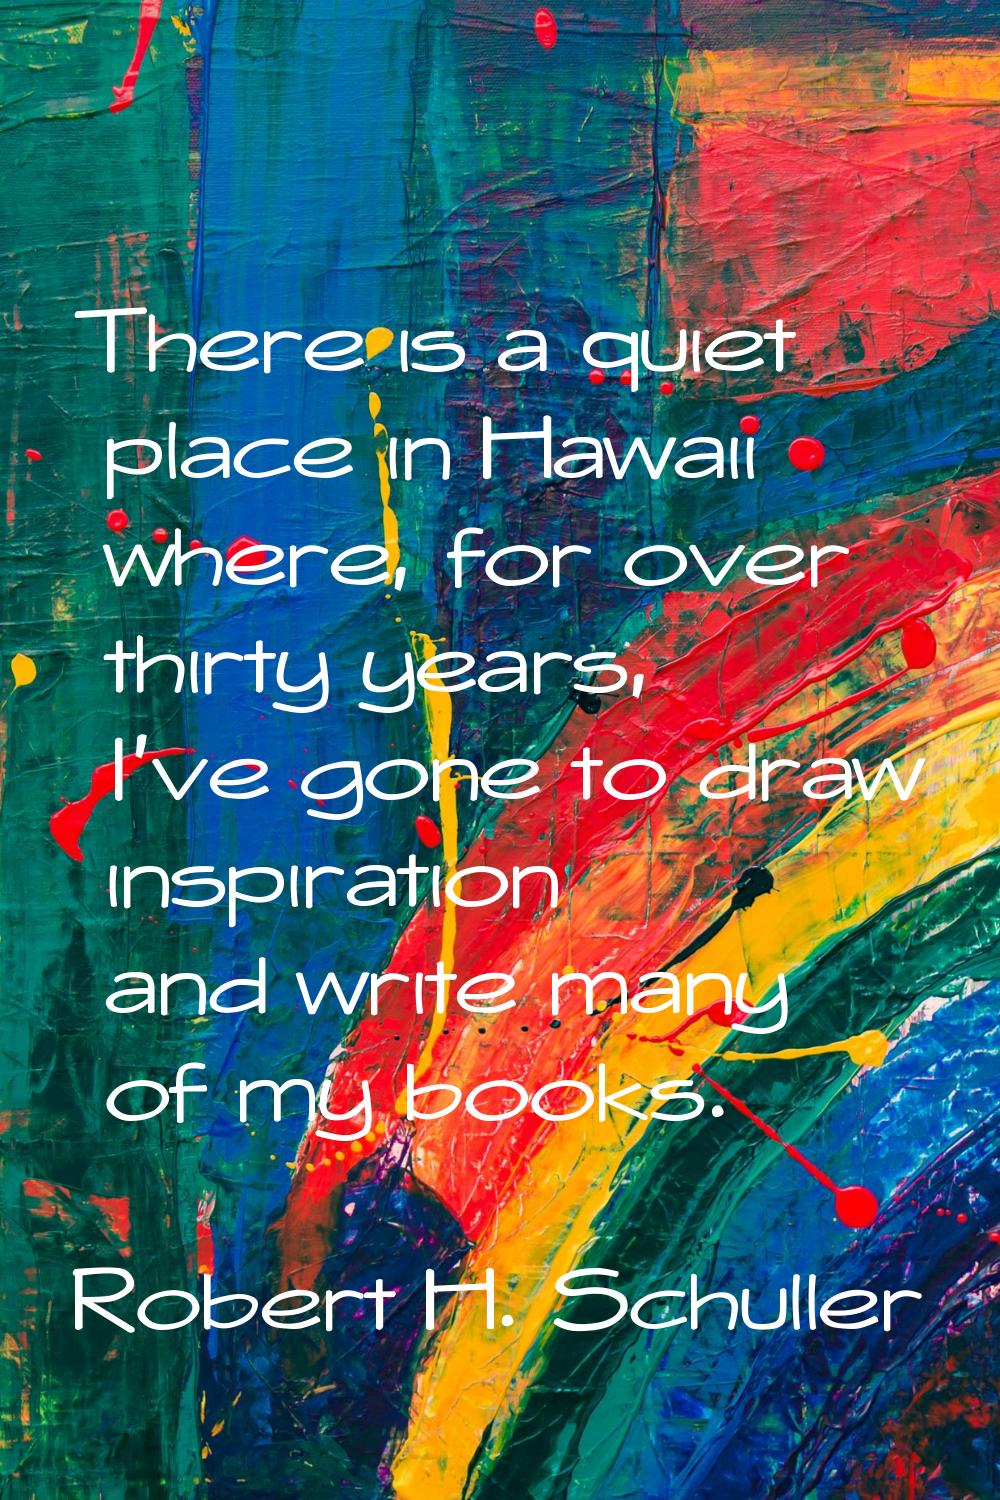 There is a quiet place in Hawaii where, for over thirty years, I've gone to draw inspiration and wr